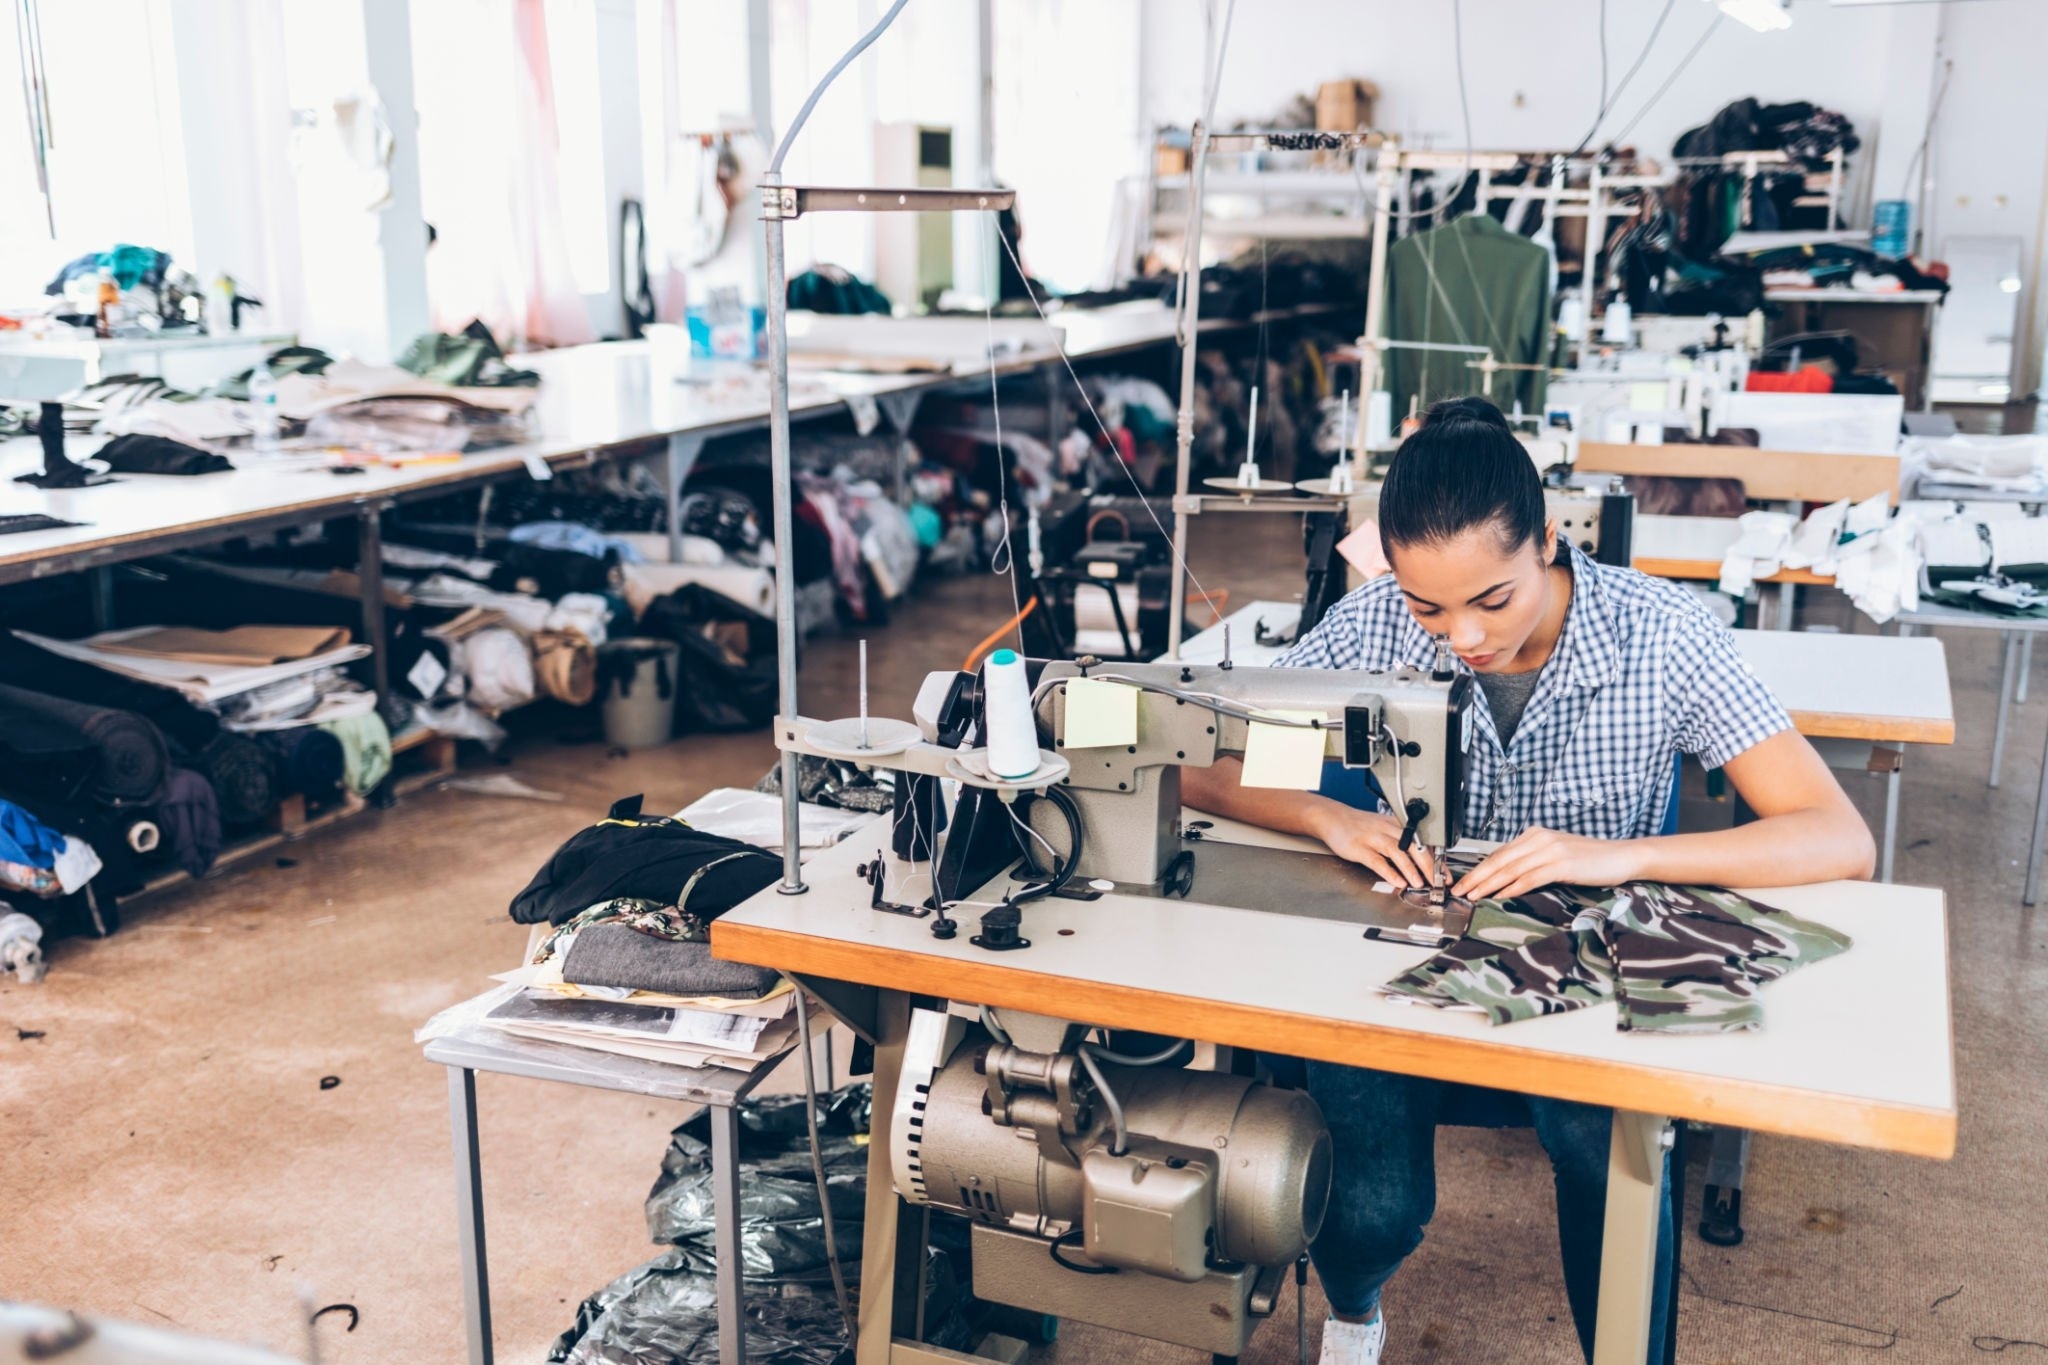 How to find the Vietnam Clothing Manufacturer